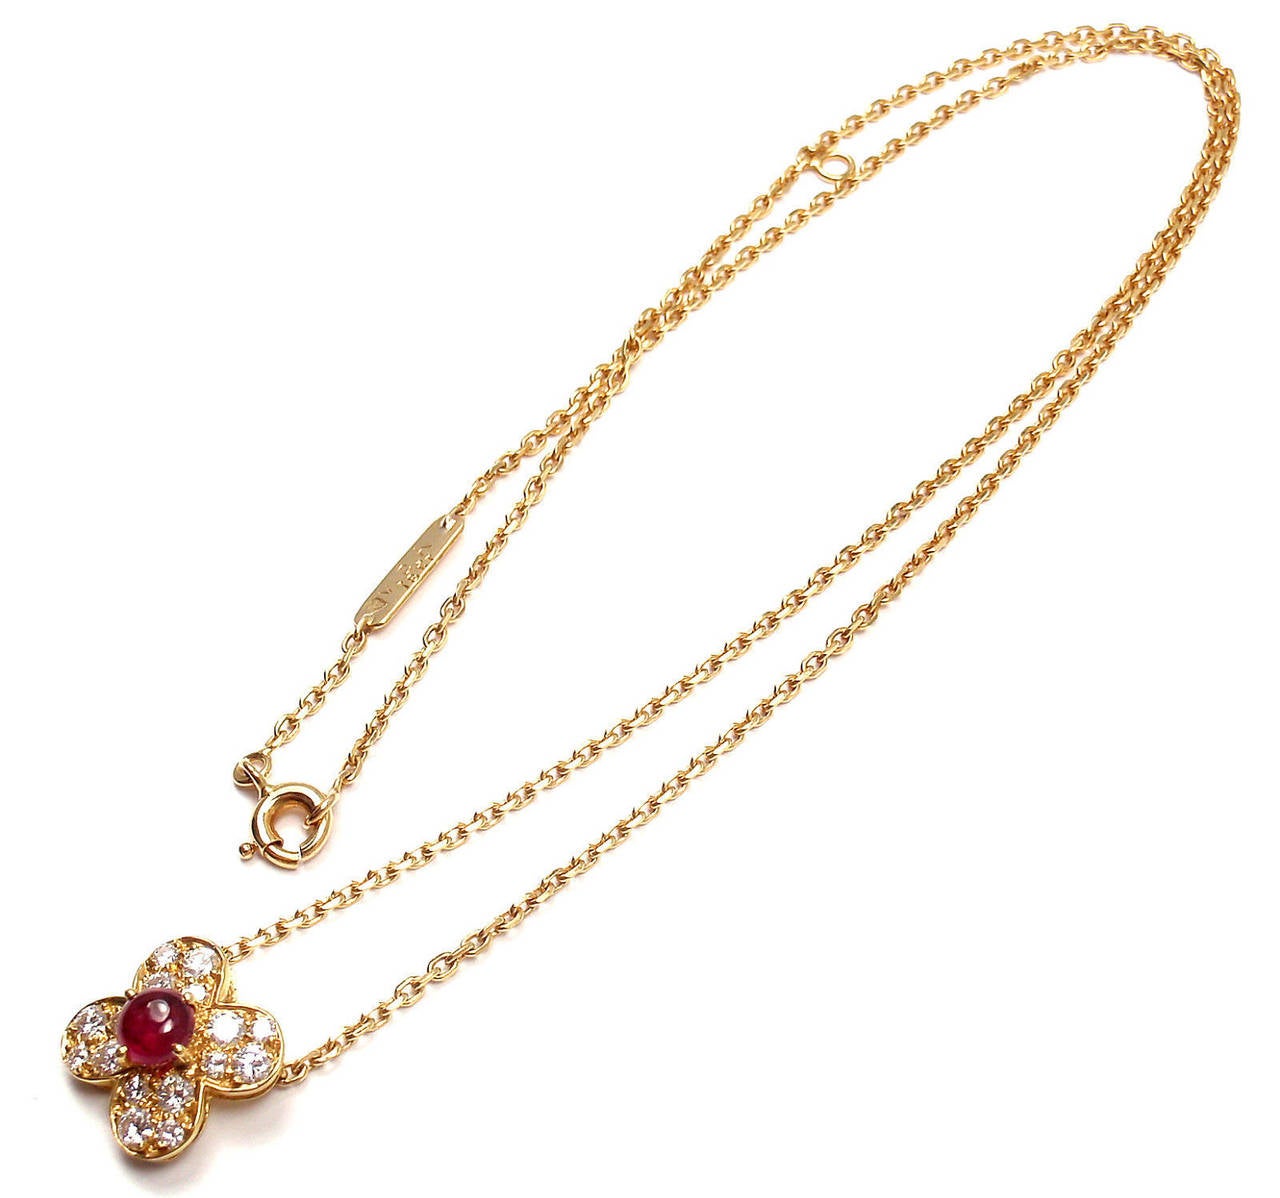 18k Yellow Gold Diamond Ruby  Trefle Clover Alhambra Pendant Necklace by Van Cleef & Arpels.

With 16 brilliant round cut diamonds VVS clarity, F color
Total weight .41ctw
1 ruby .40ct

Details:
Length: 16'' necklace
Alhambra: 11mm x